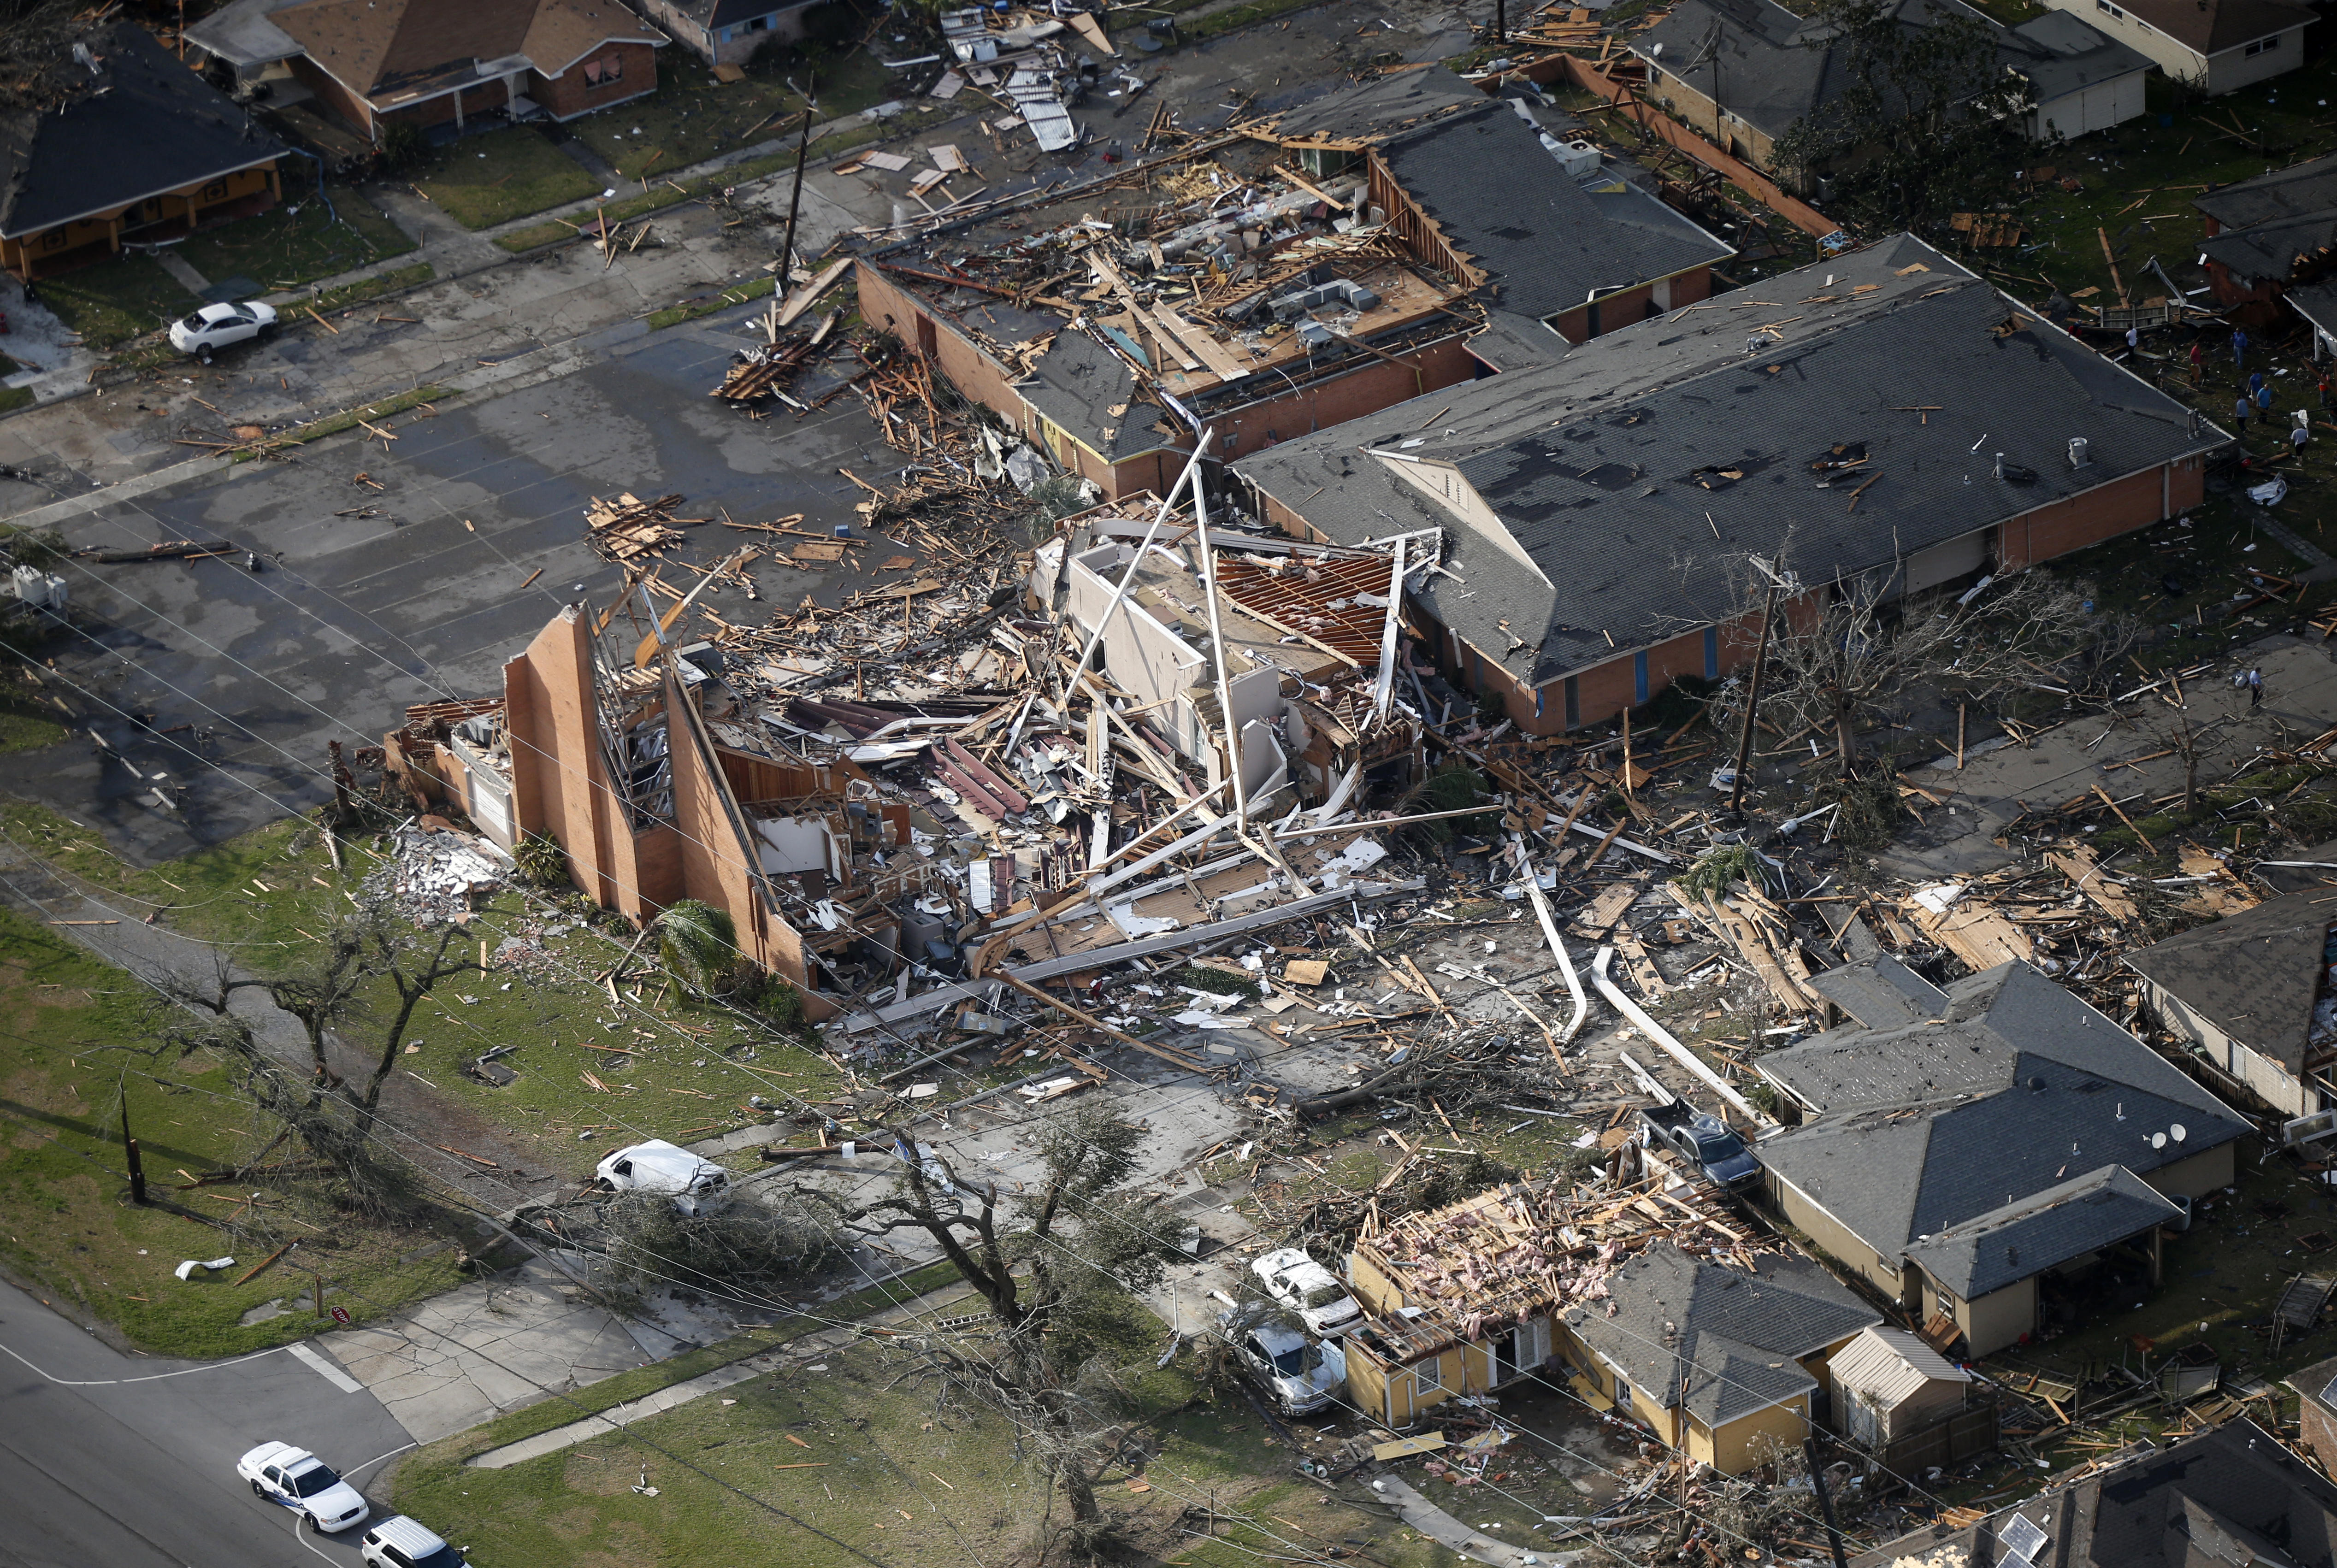 Louisiana in state of emergency after tornadoes cause heavy damage - CBS News